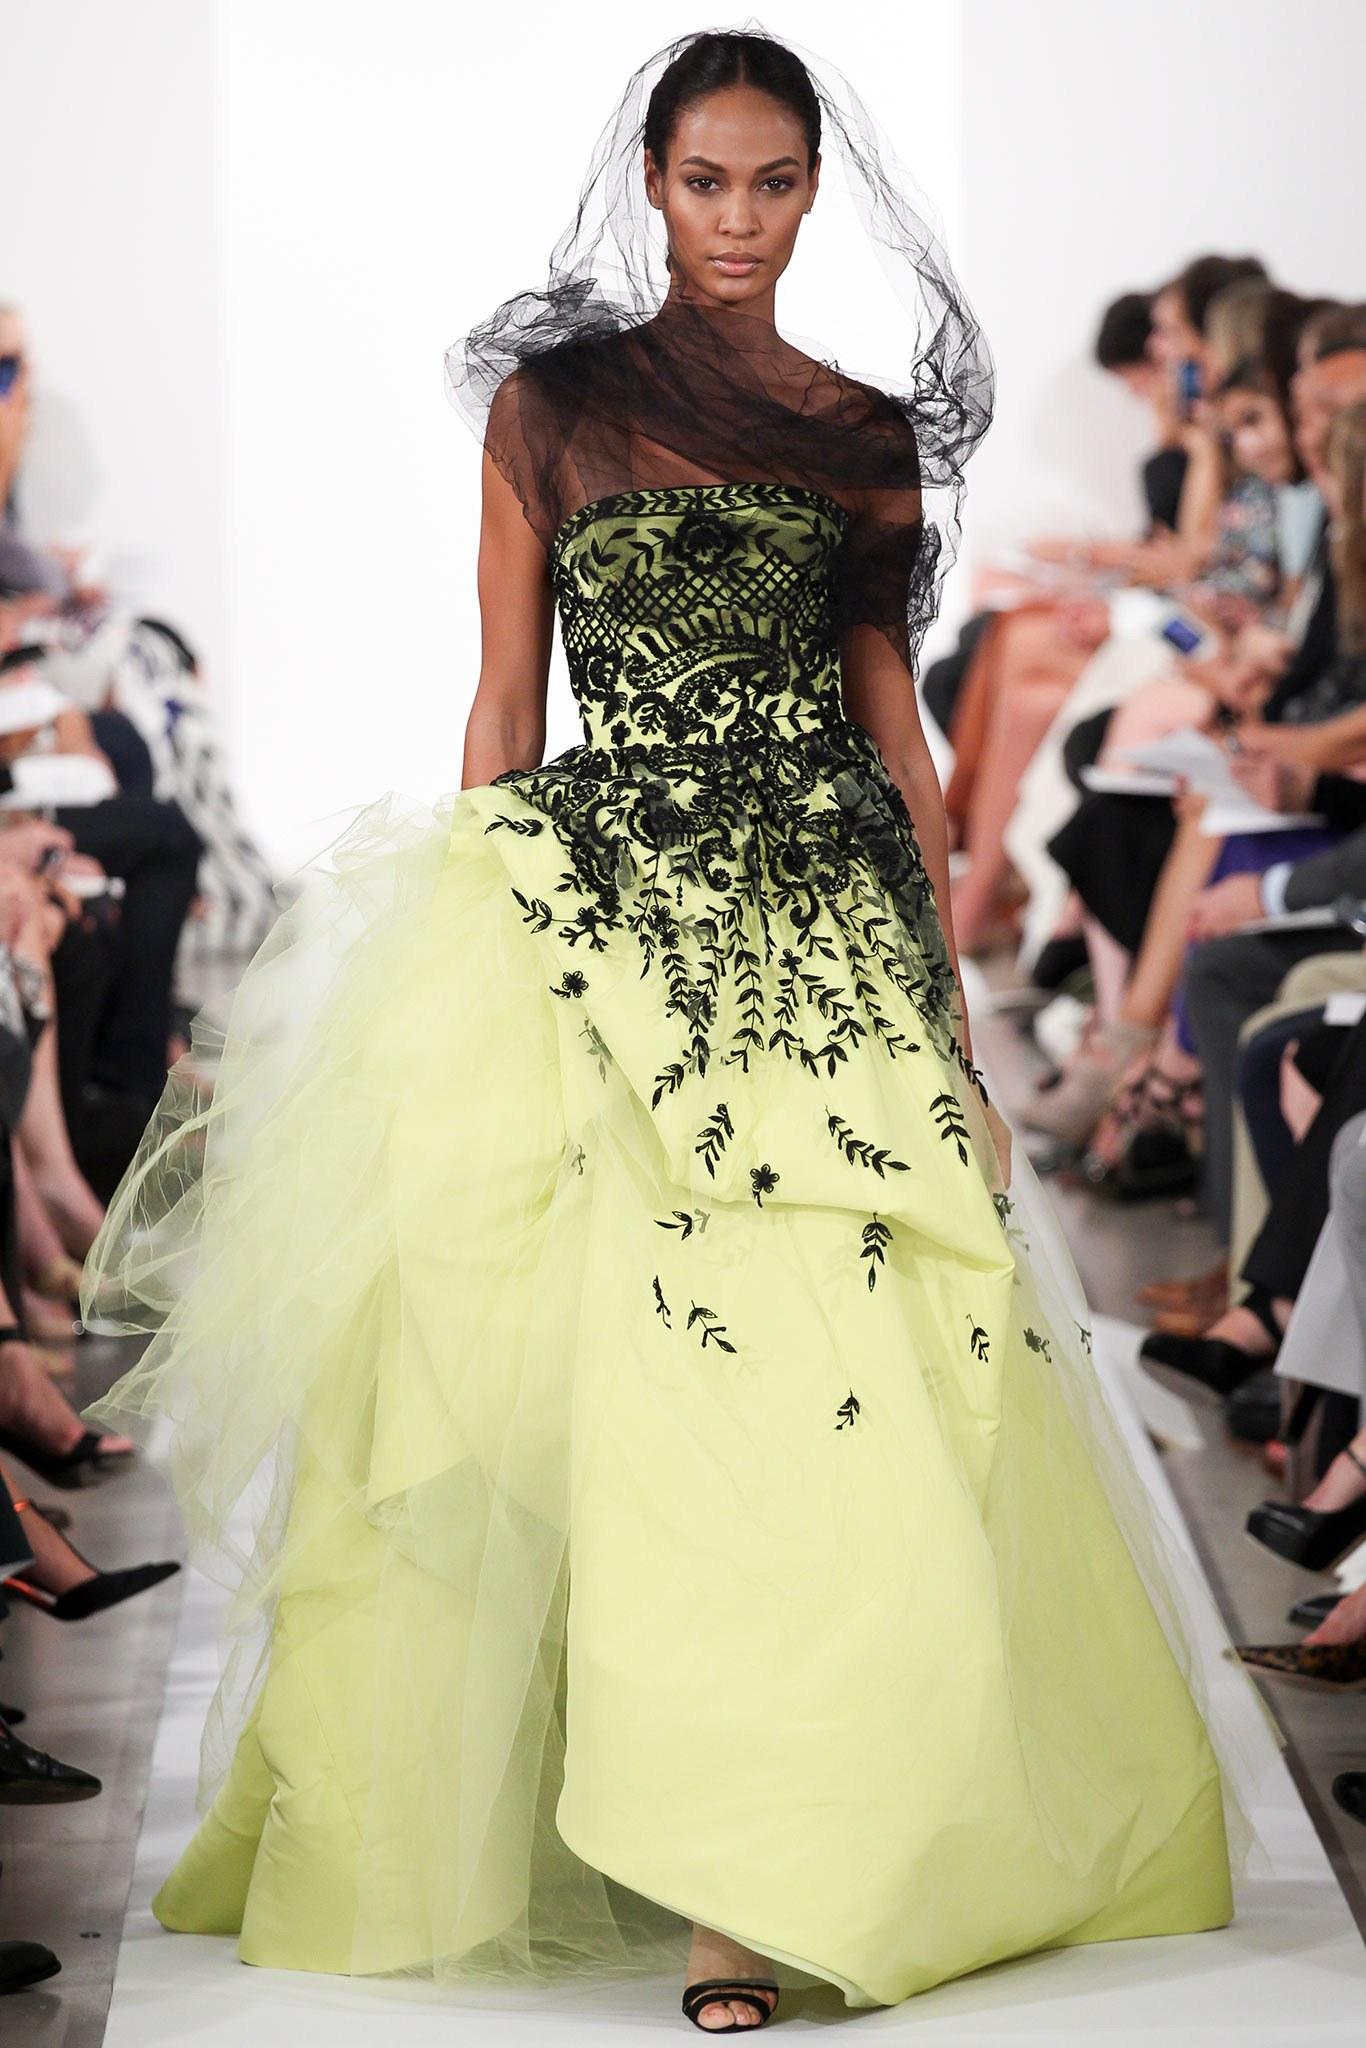 Oscar de la Renta Spring 2014 Runway Chartreuse Yellow Tulle Gown.  Strapless design with gathered hem and black embroidery.  Centre back zipper and fully boned interior bodice.  Garment is tagged size USA 6 but runs small and is best for a USA 4. 